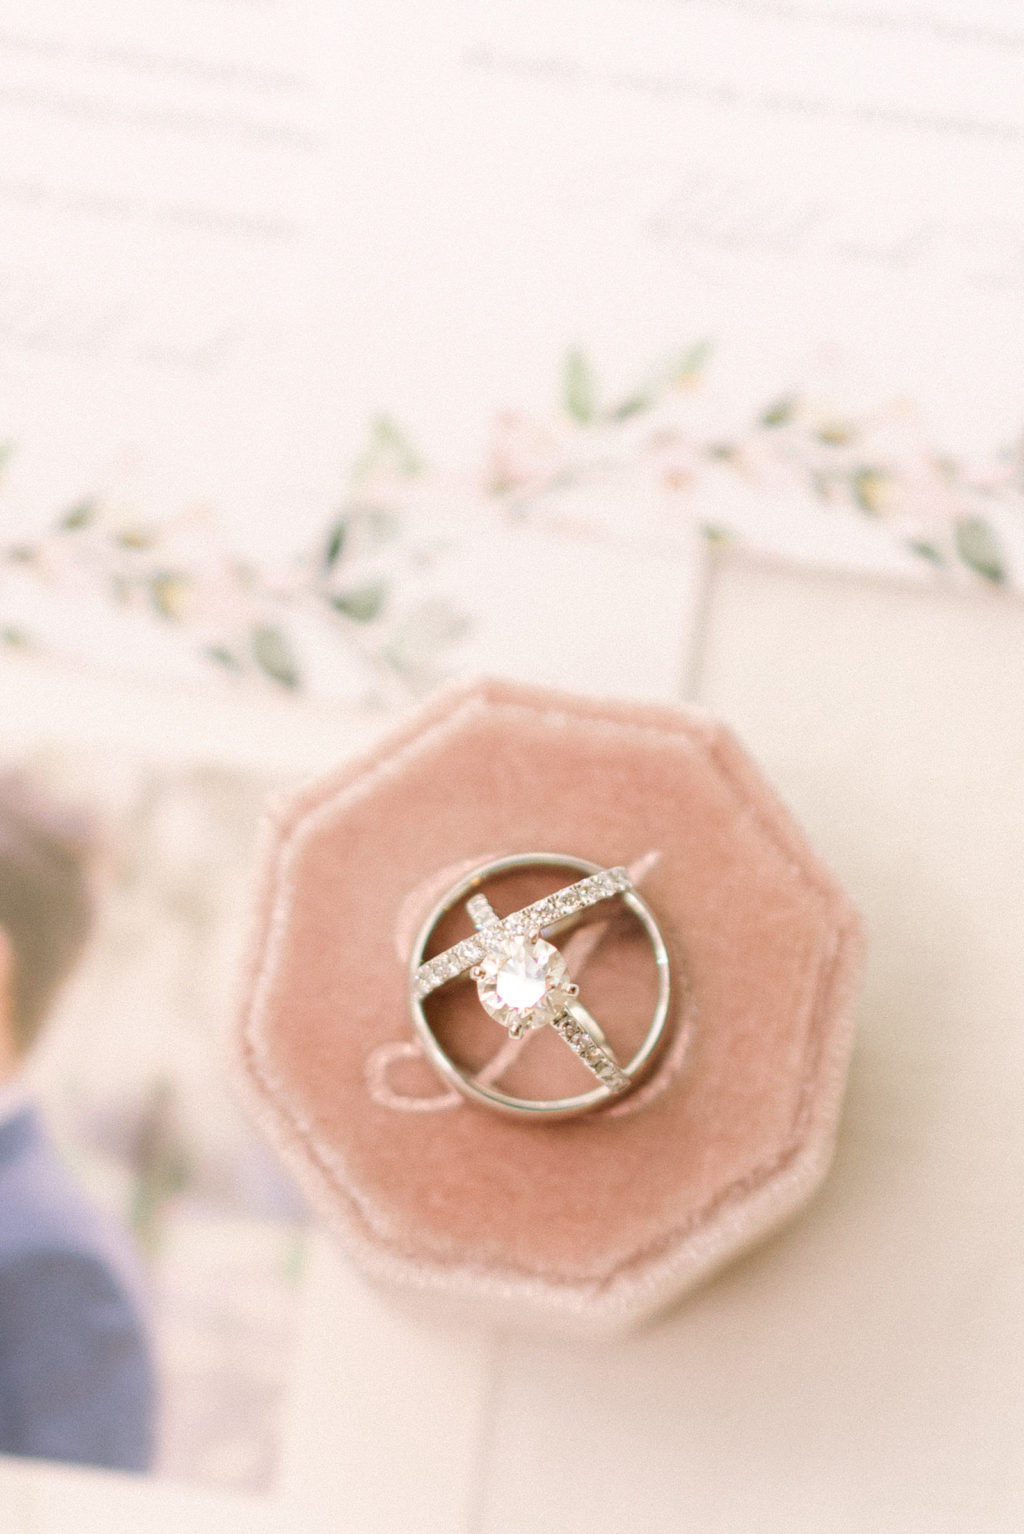 Round Solitaire Diamond Engagement Ring, Mr. and Mrs. Wedding Bands on Blush Pink Velvet Ring Box